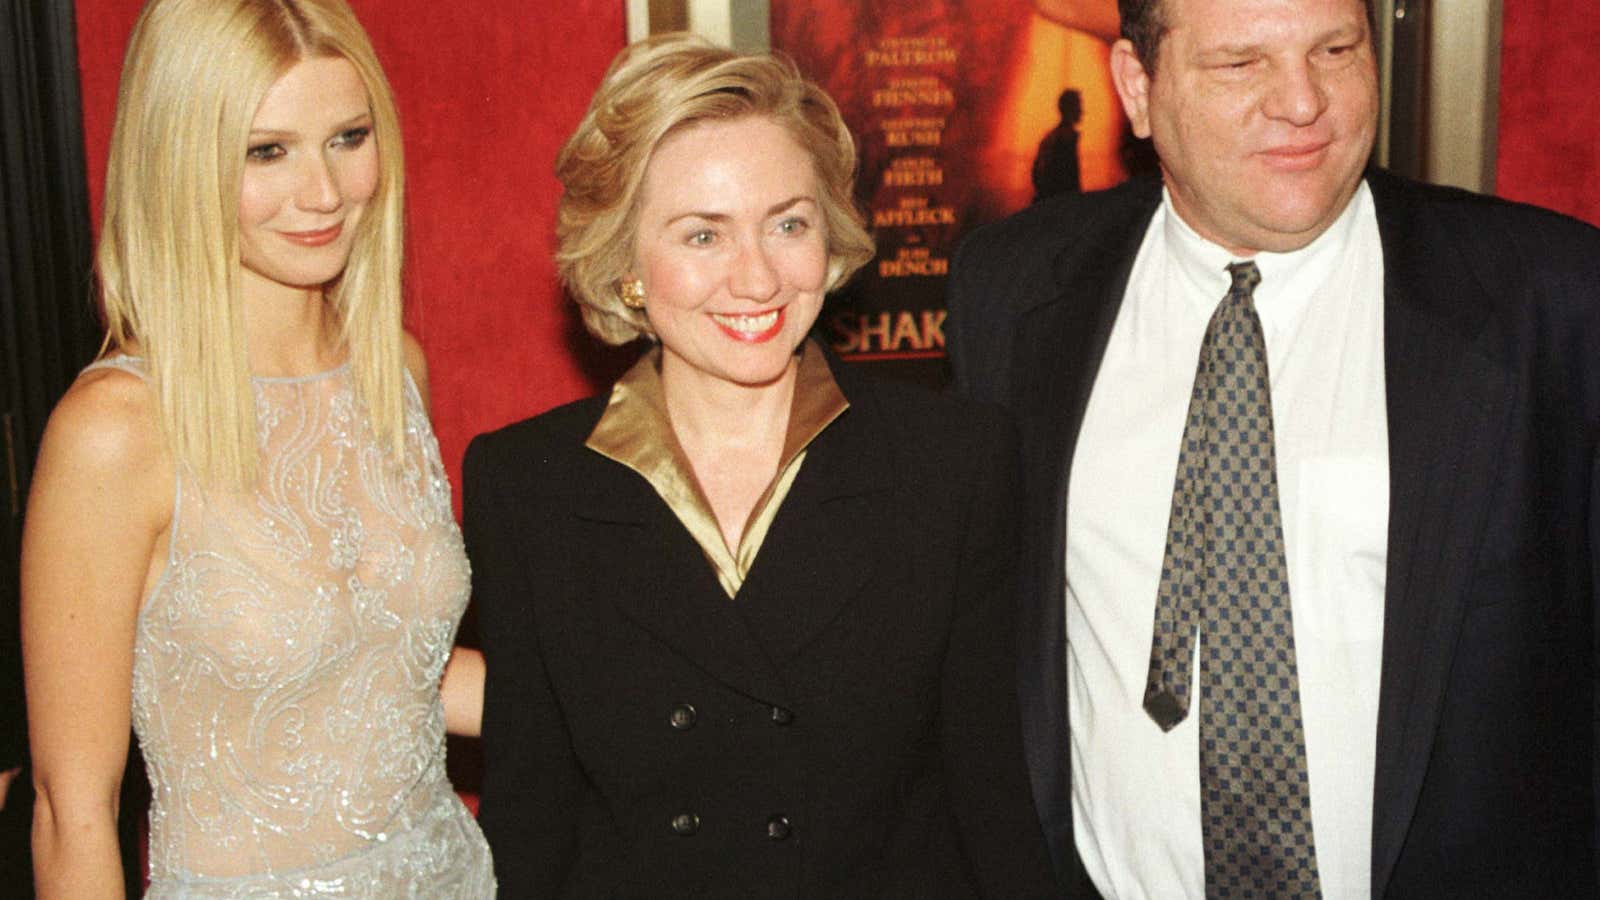 In happier days: at the premiere of “Shakespeare in Love,” 1998.